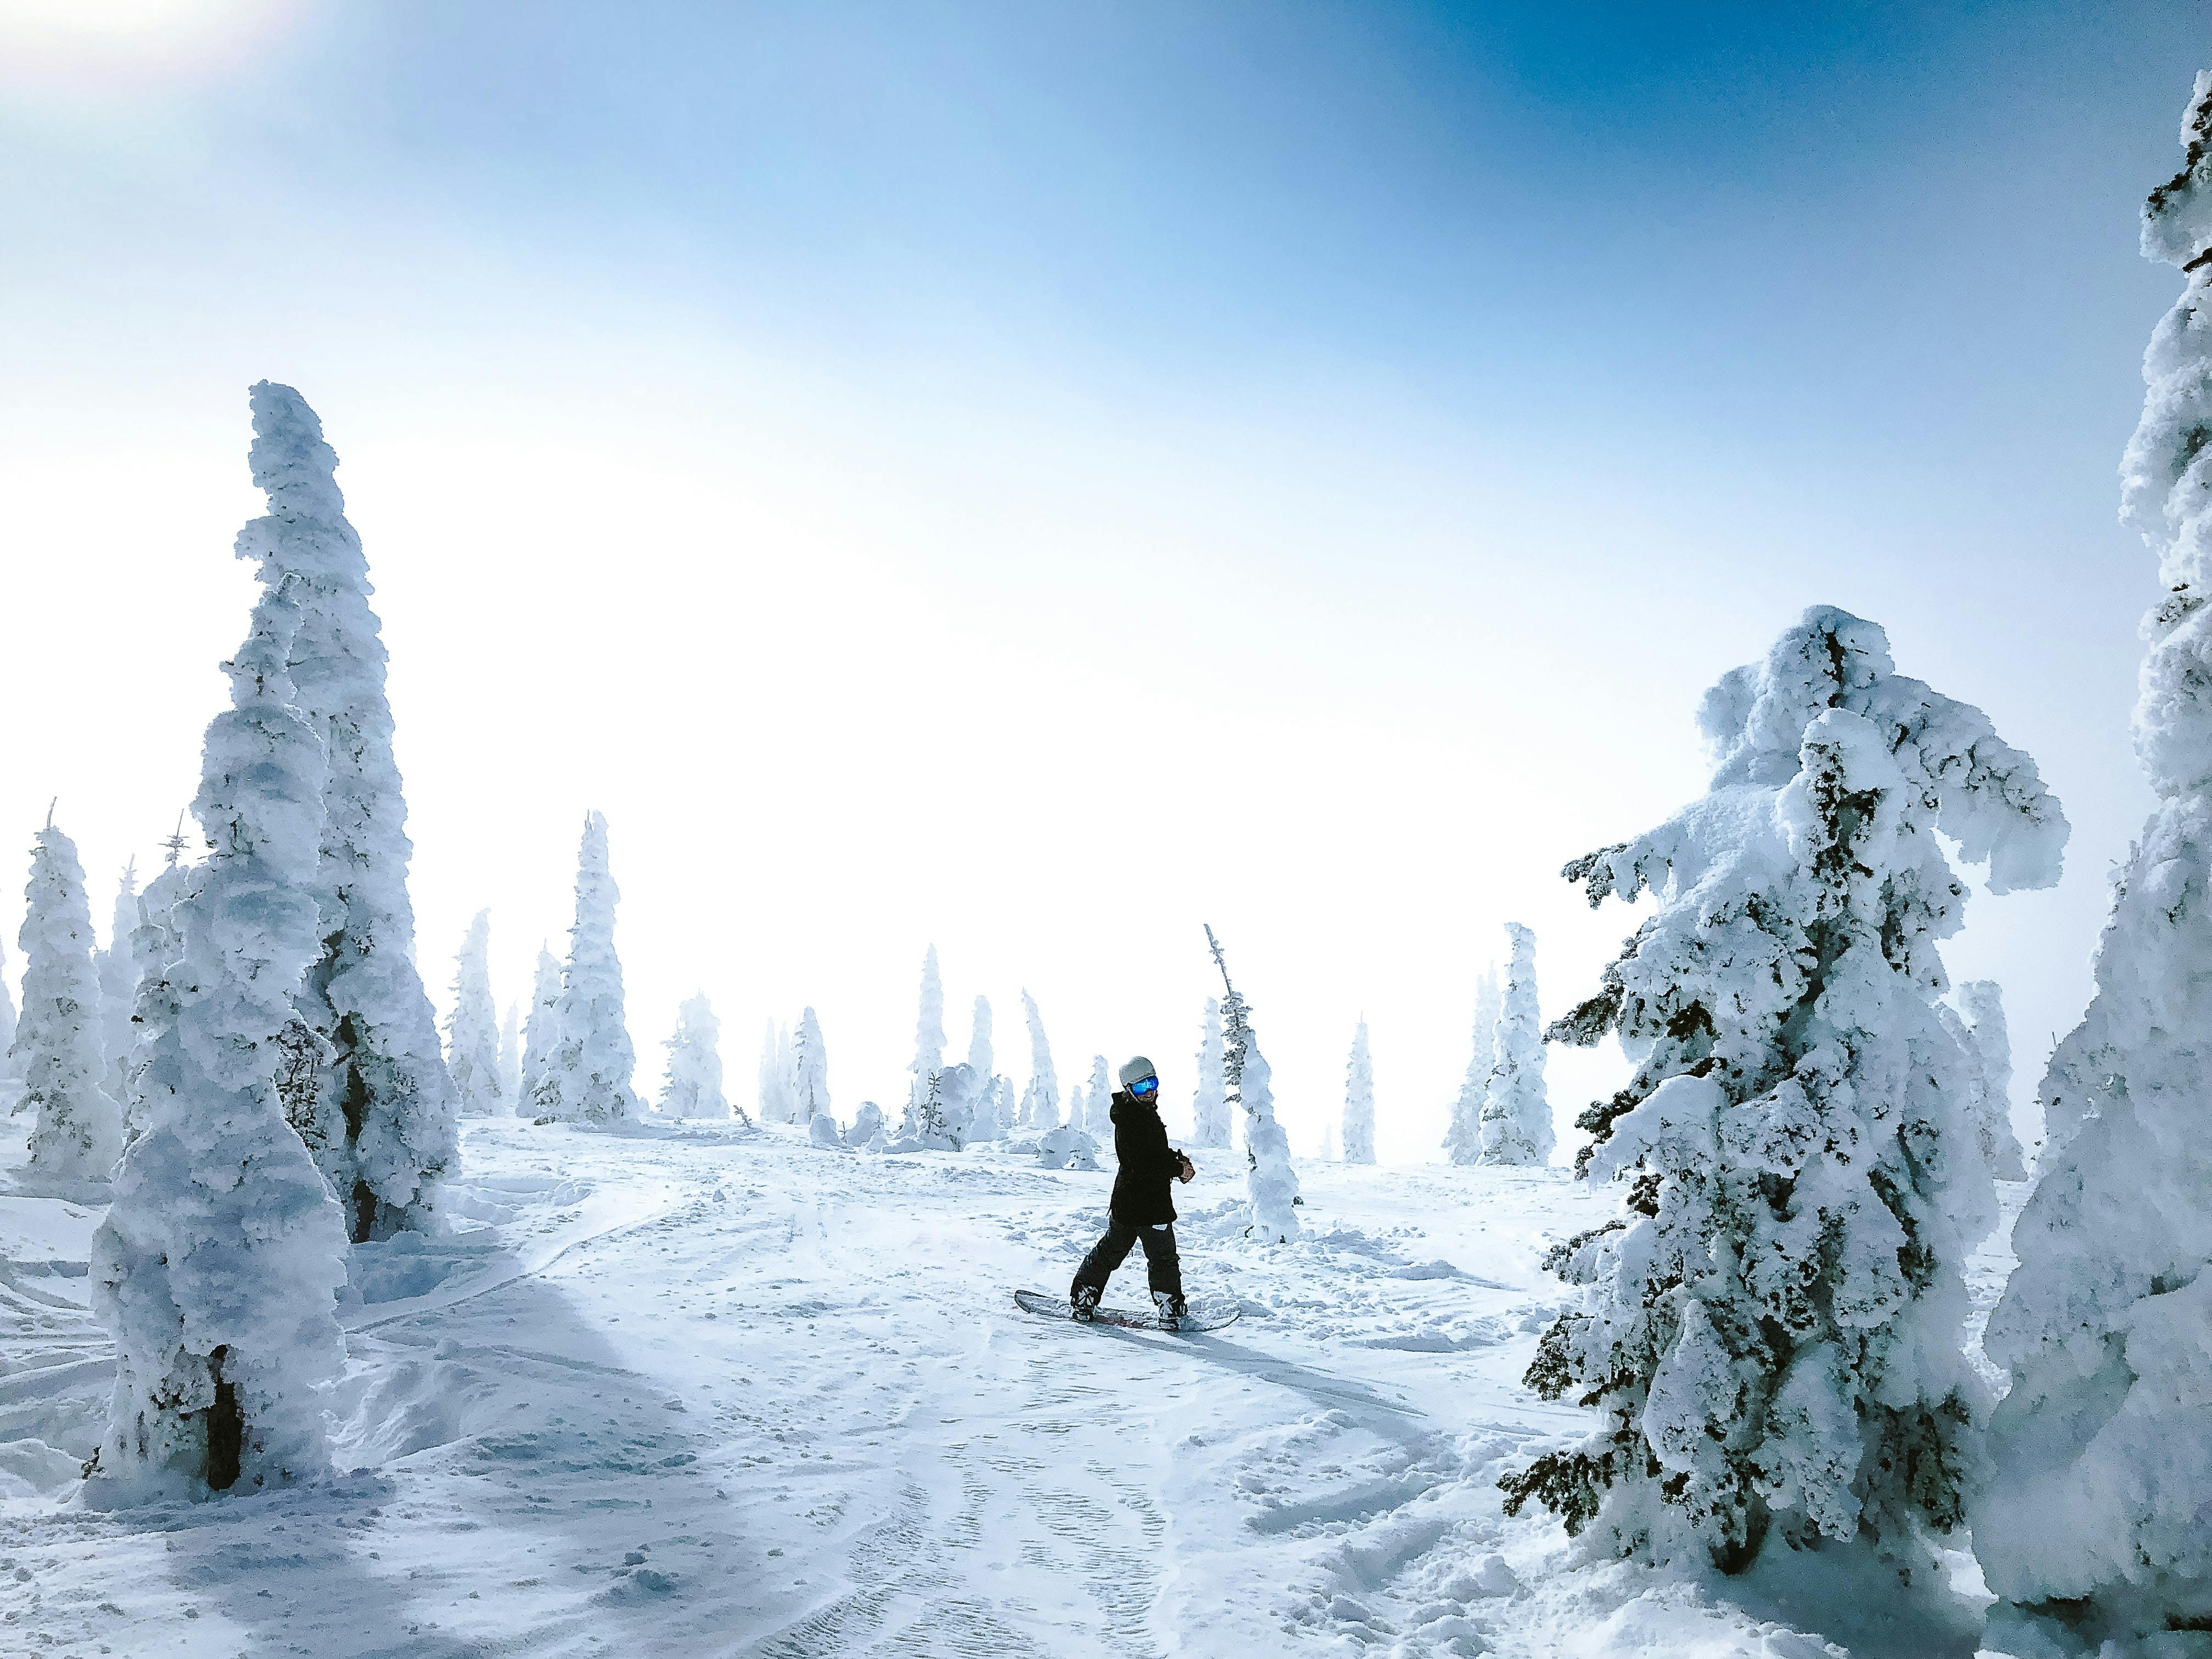 A snowboarder standing on a snowboard between snowy trees.